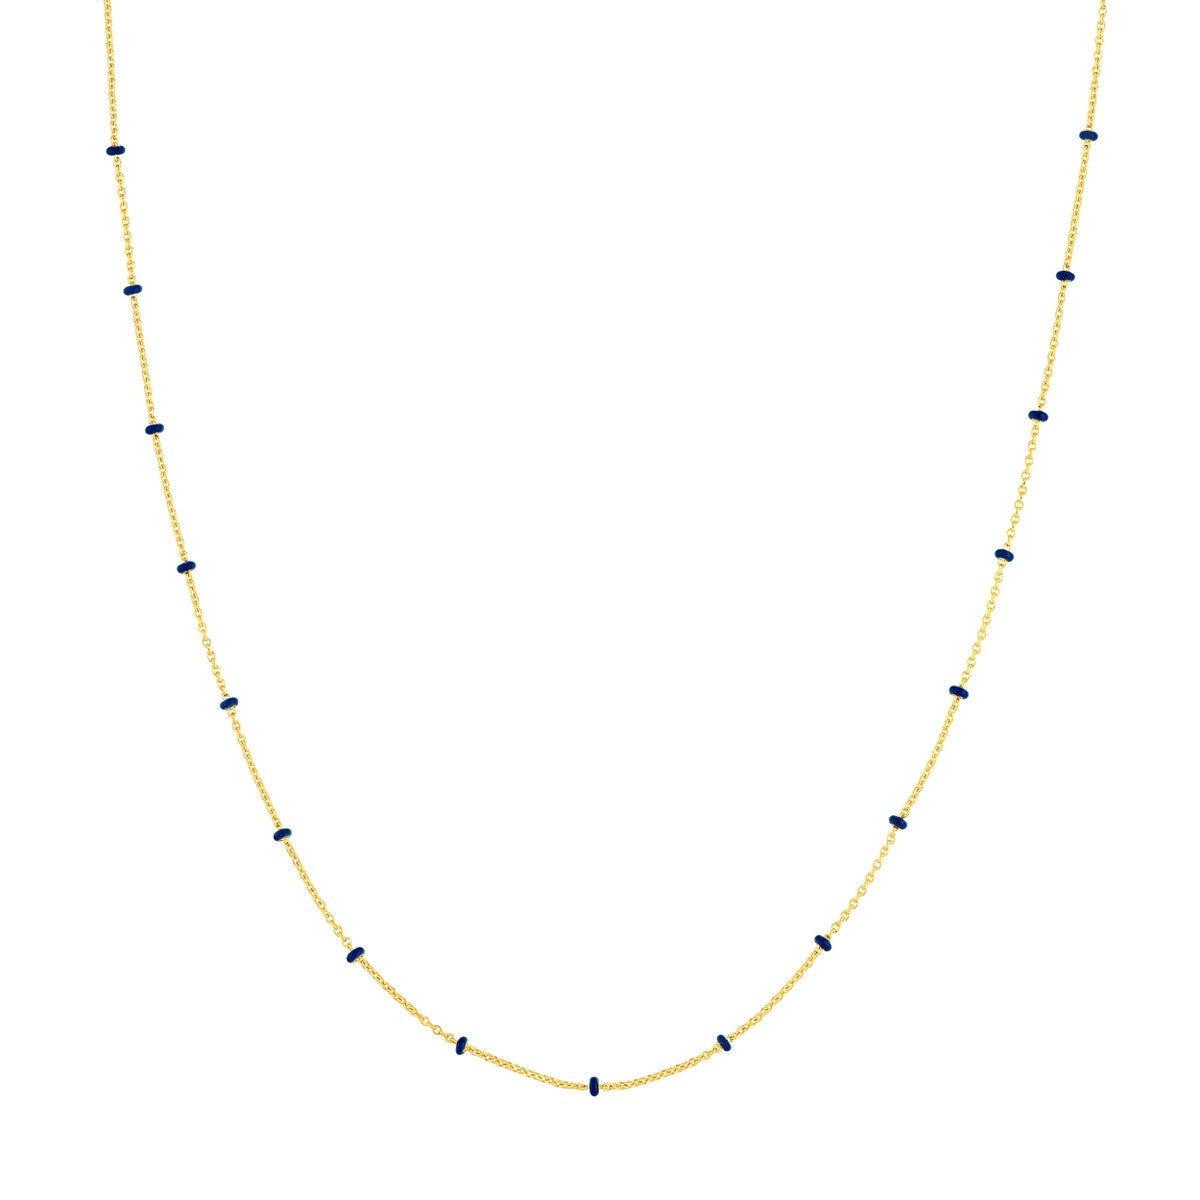 14K GOLD ROLO CHAIN WITH NAVY BLUE ENAMEL BEADS